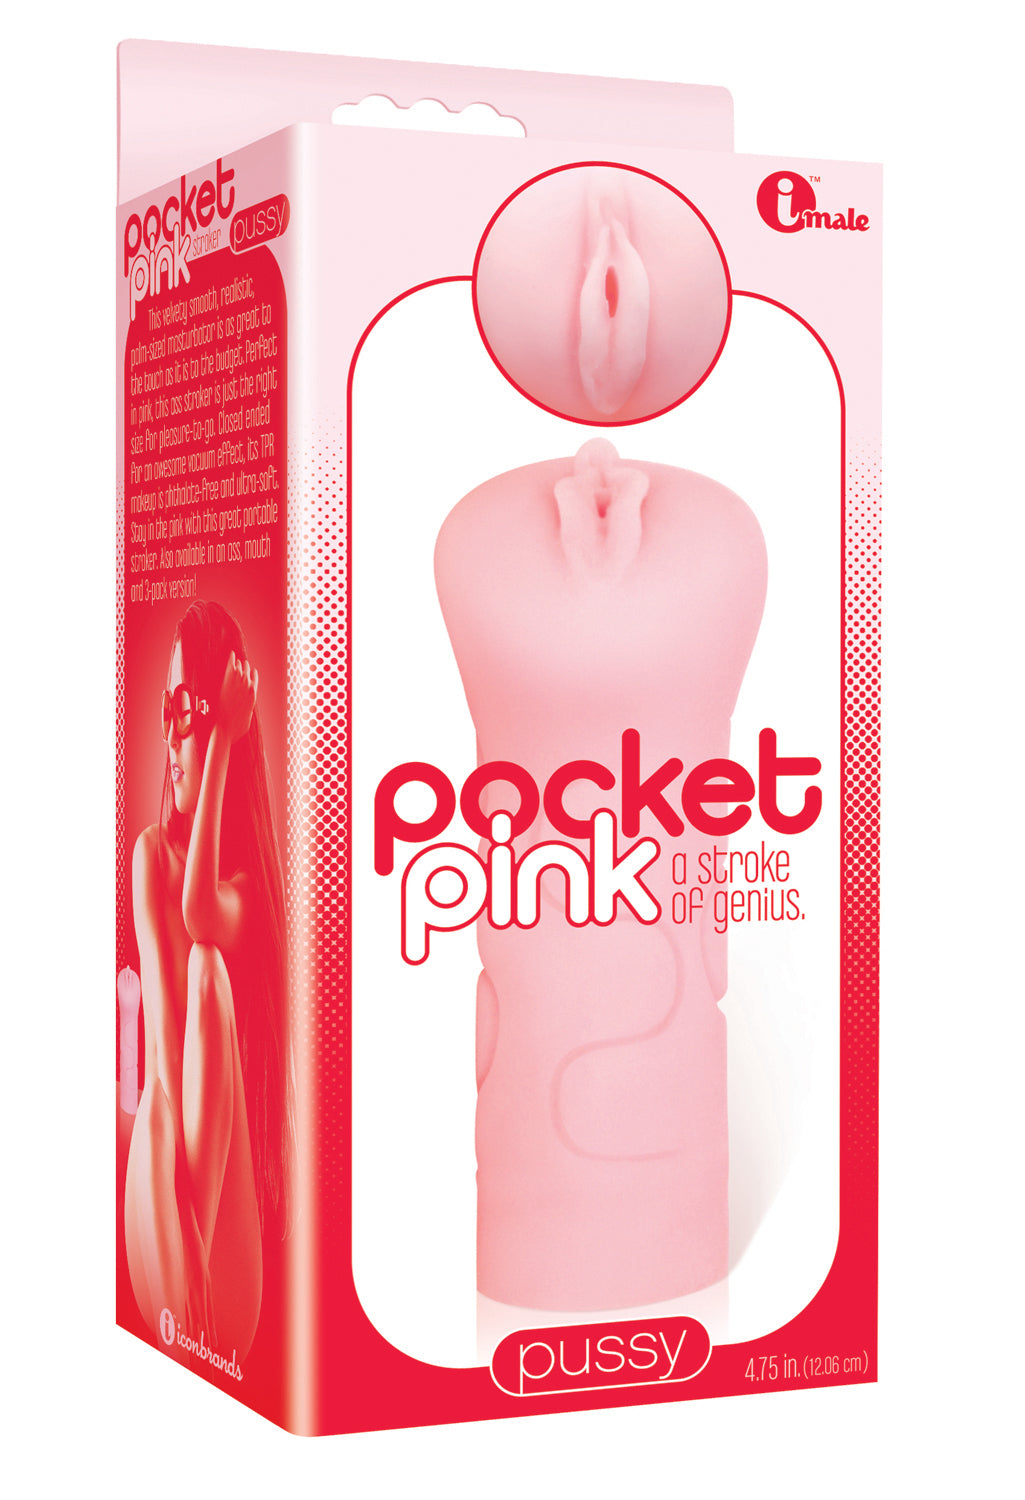 THE 9'S POCKET PINK PUSSY